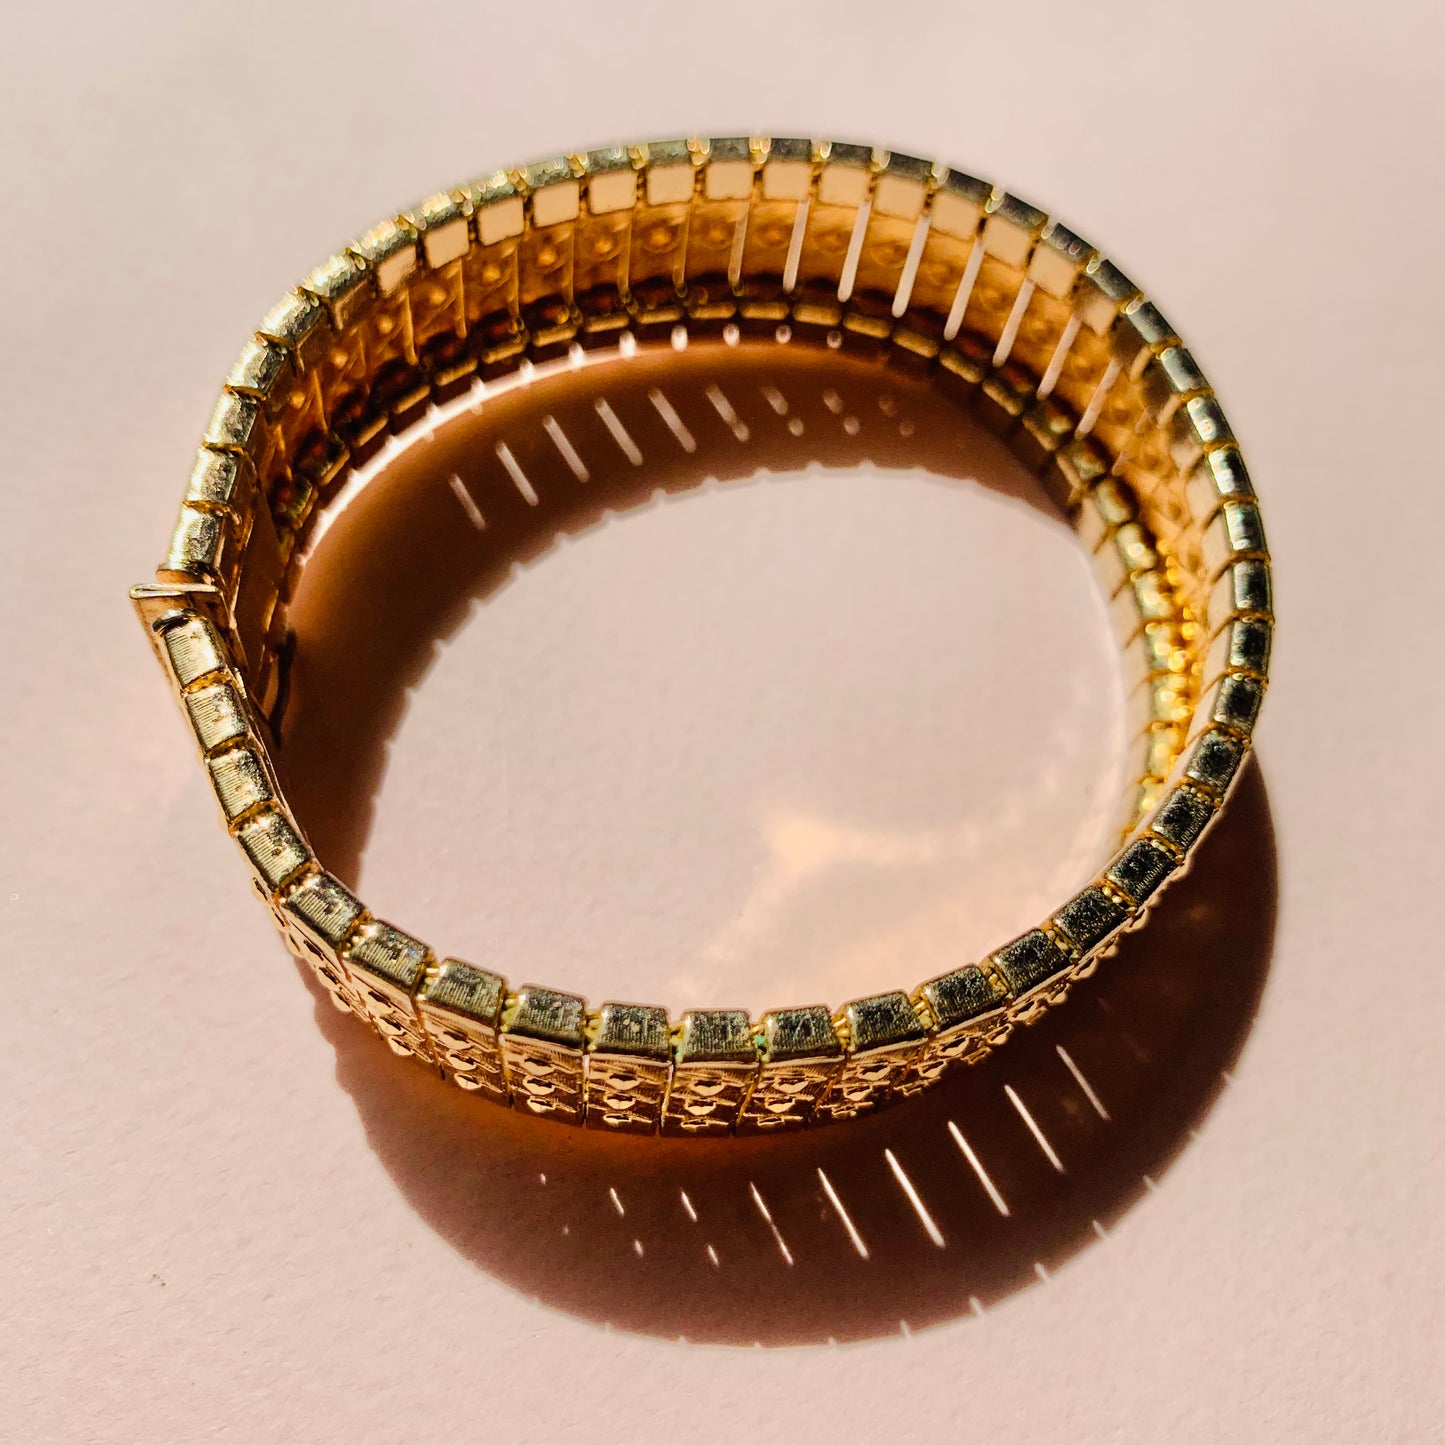 Extremely rare antique German rolled gold bangle